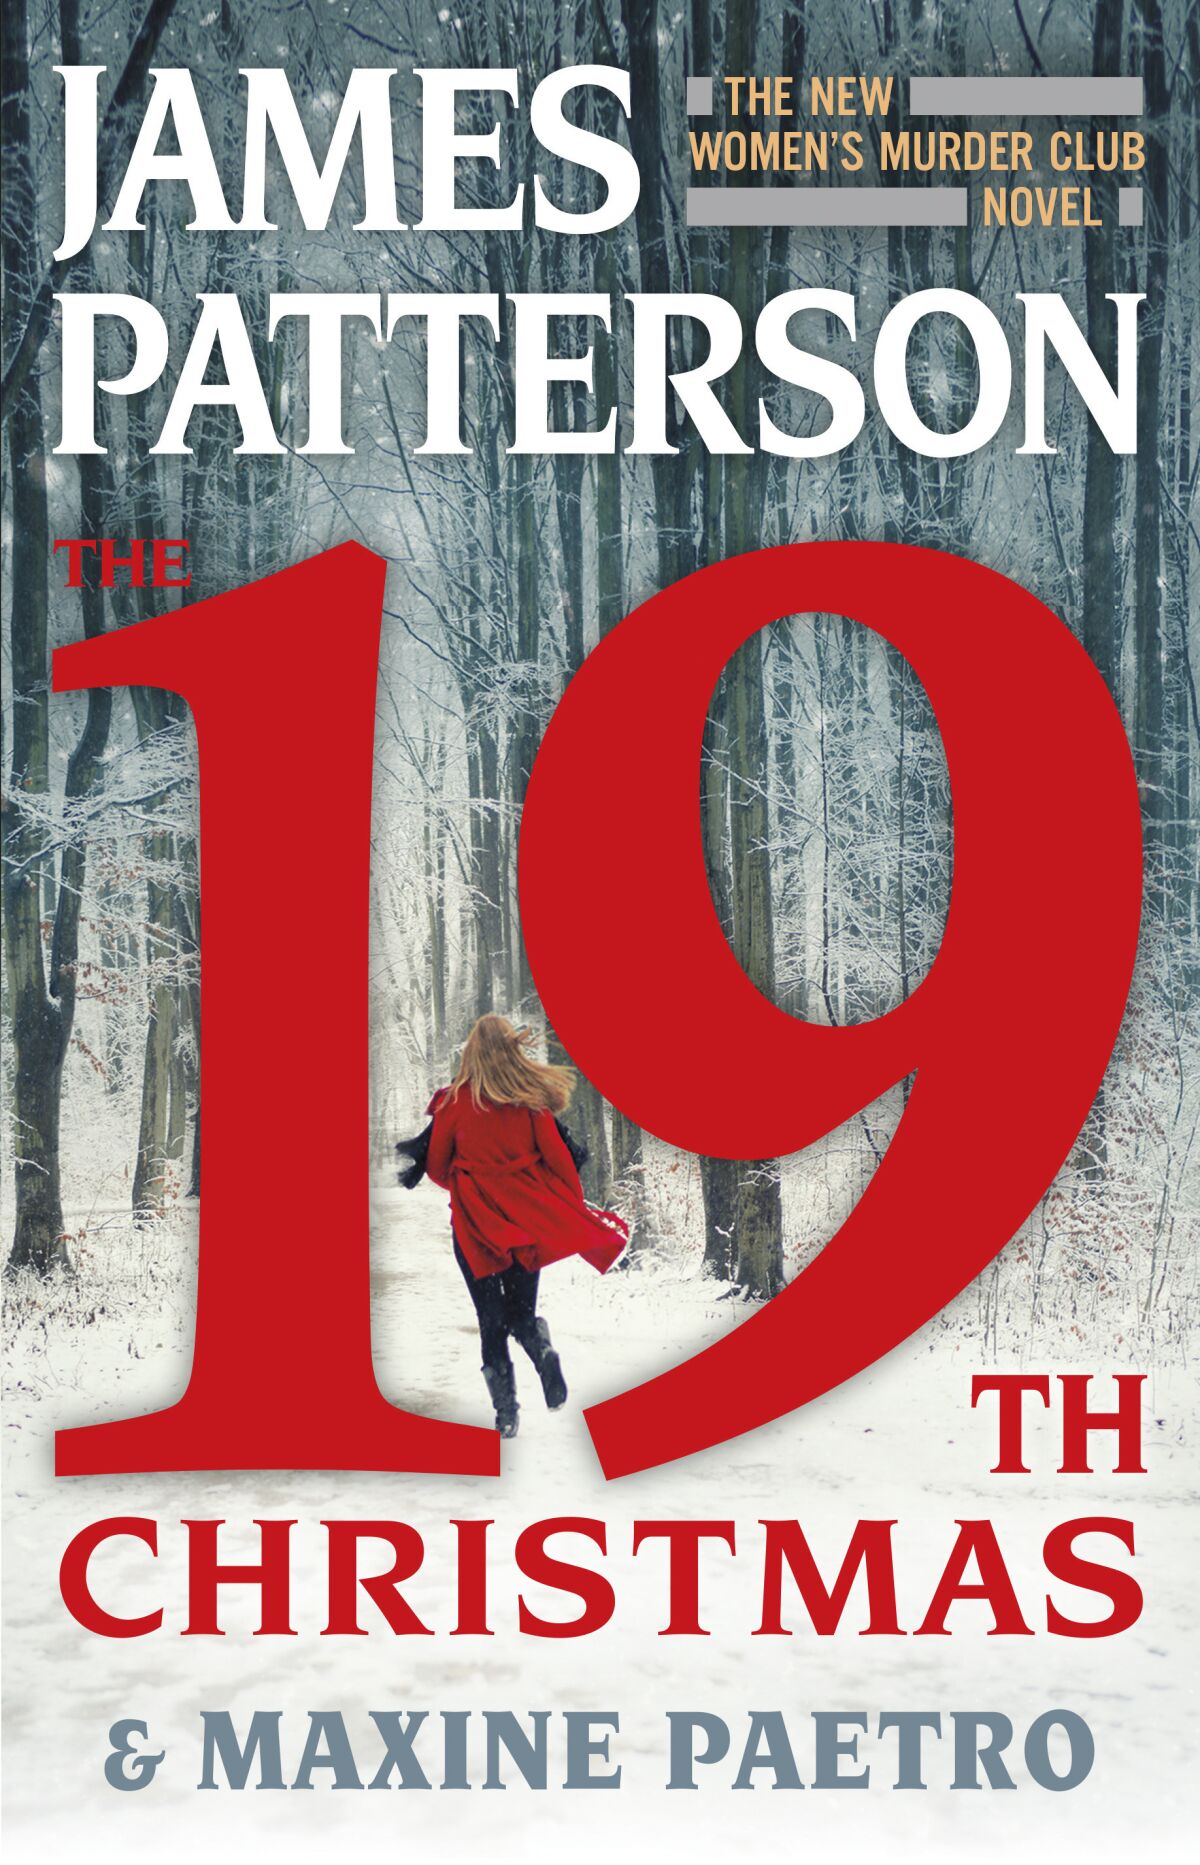 Book Review - The 19th Christmas